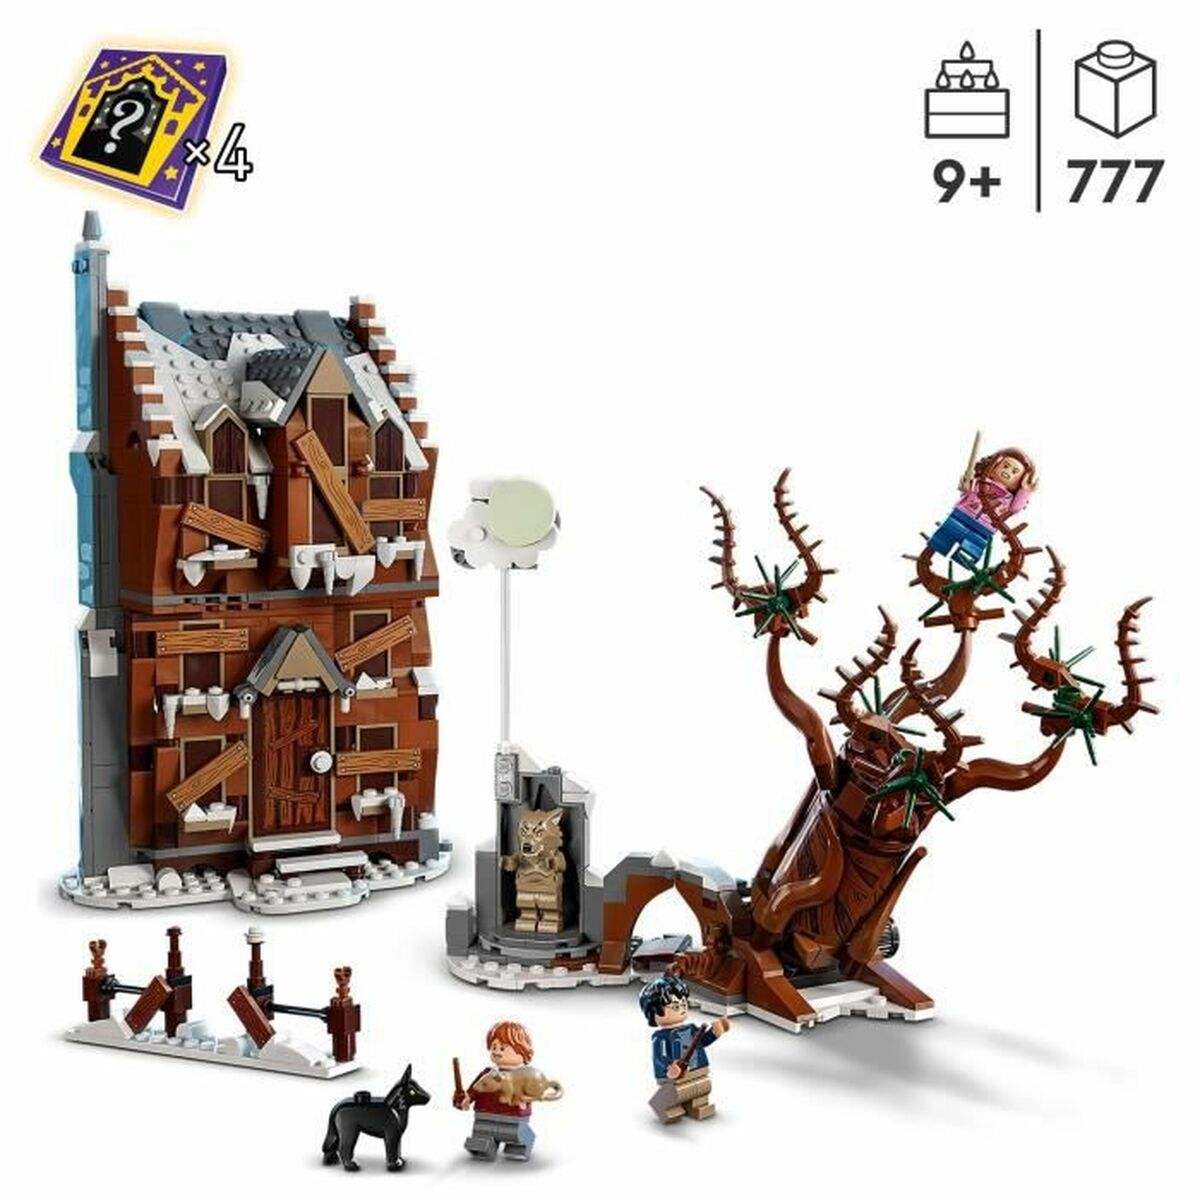 Lego Harry Potter The Shrieking Shack and Whomping Willow